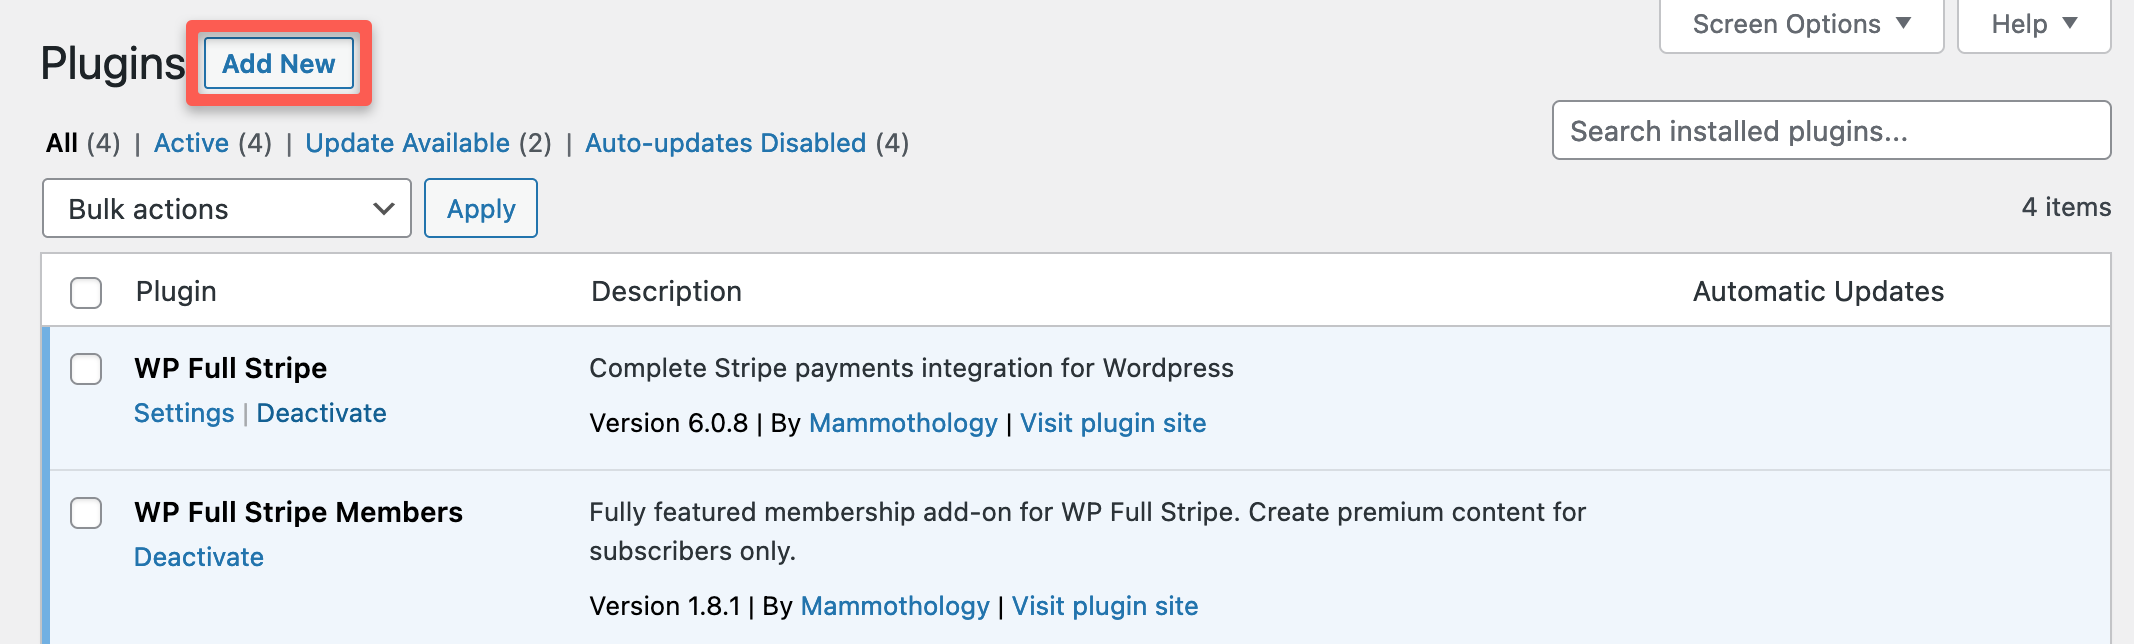 To install the WordPress Code Snippets plugin, click the “Add New” button.